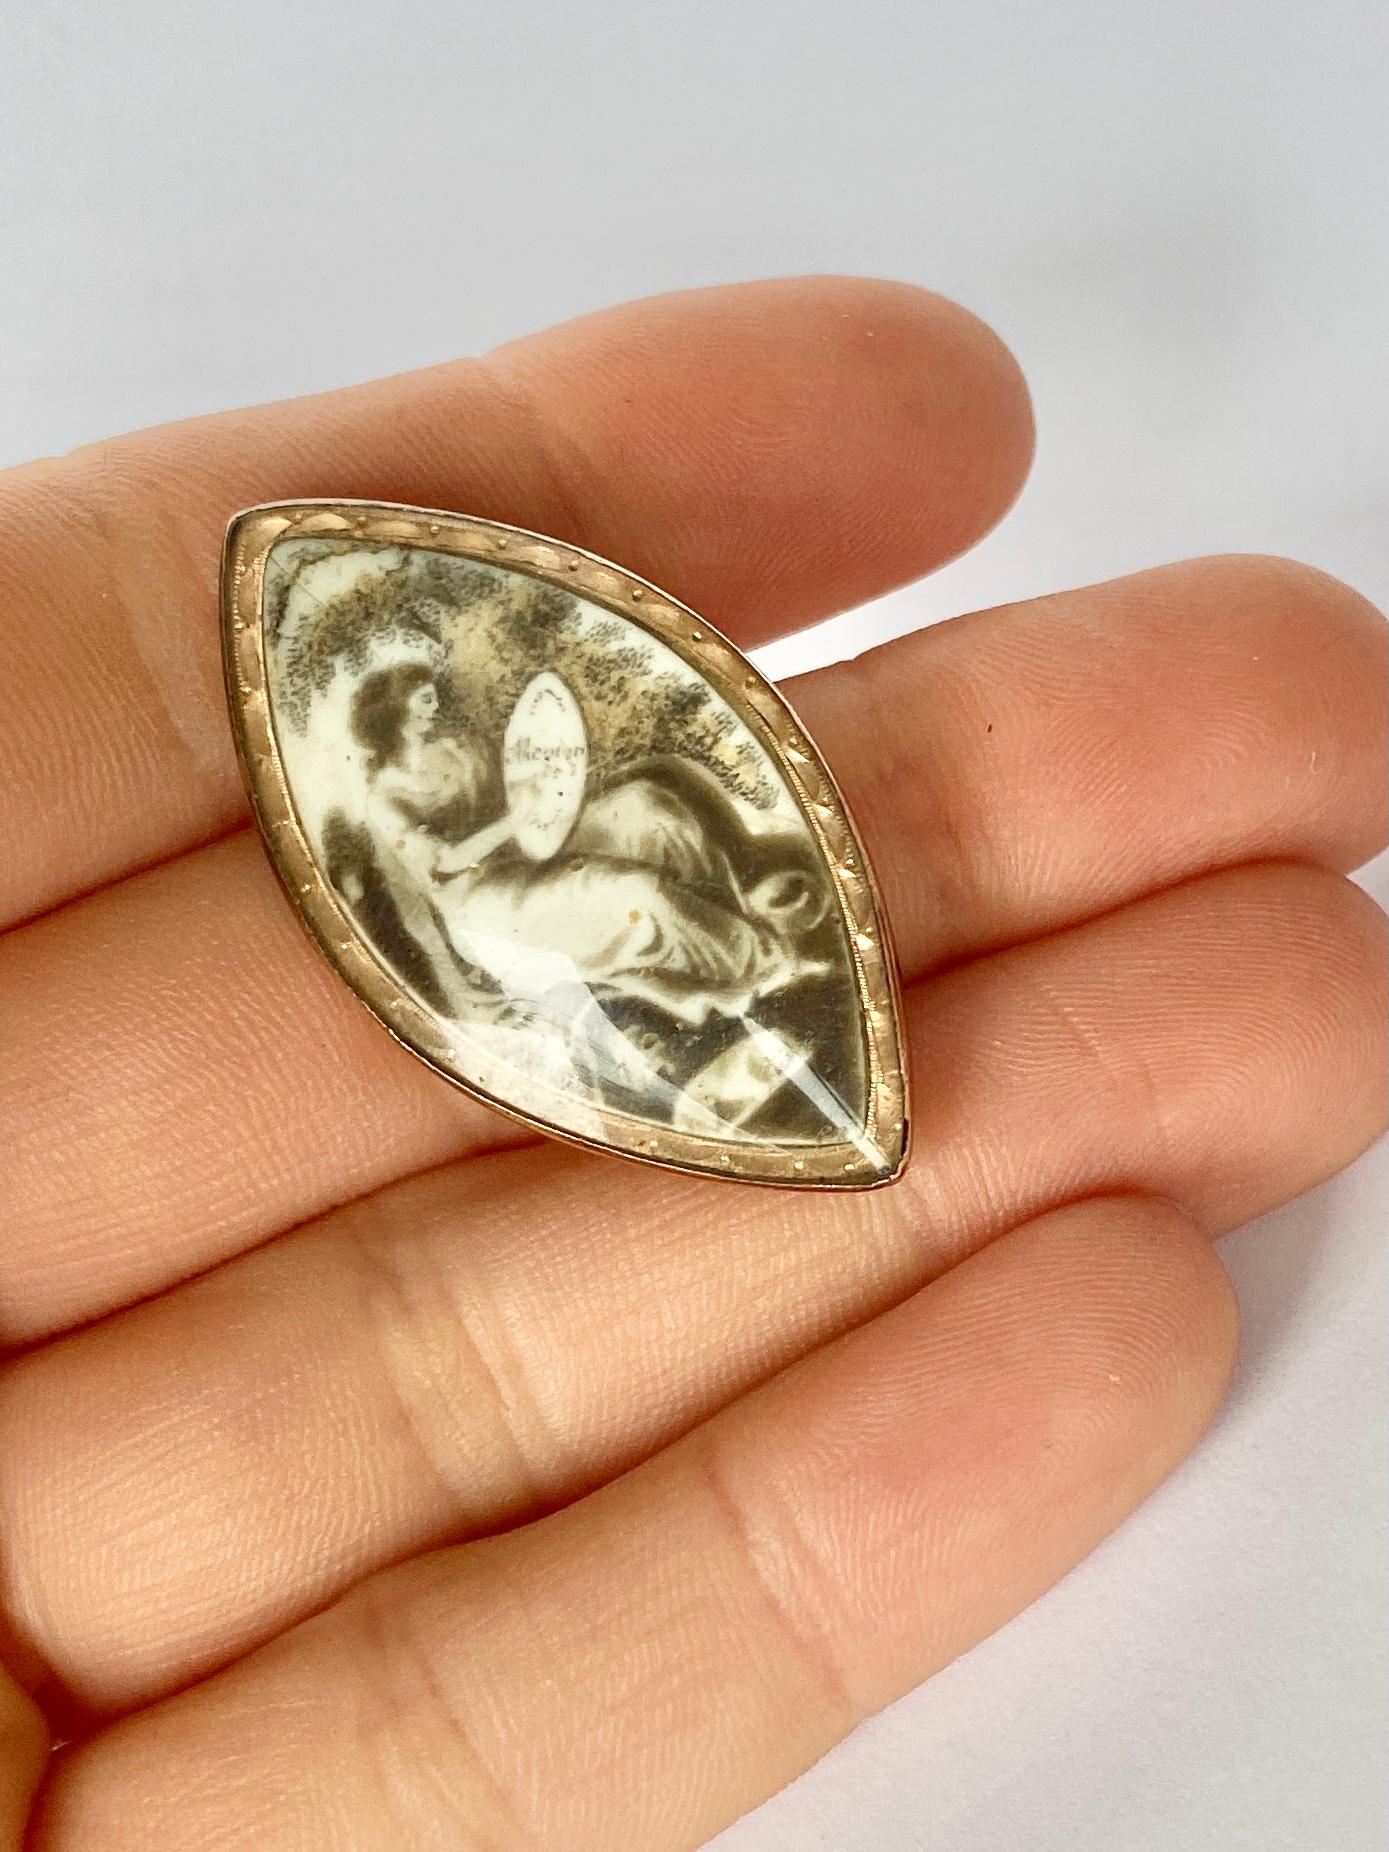 A spectacular antique Georgian brooch set with a stunning navette shaped sepia. The sepia features a scene with a woman in mourning. Modelled in 9 carat yellow gold.

Sepia dimensions: 38x21mm

Weight: 5.6g